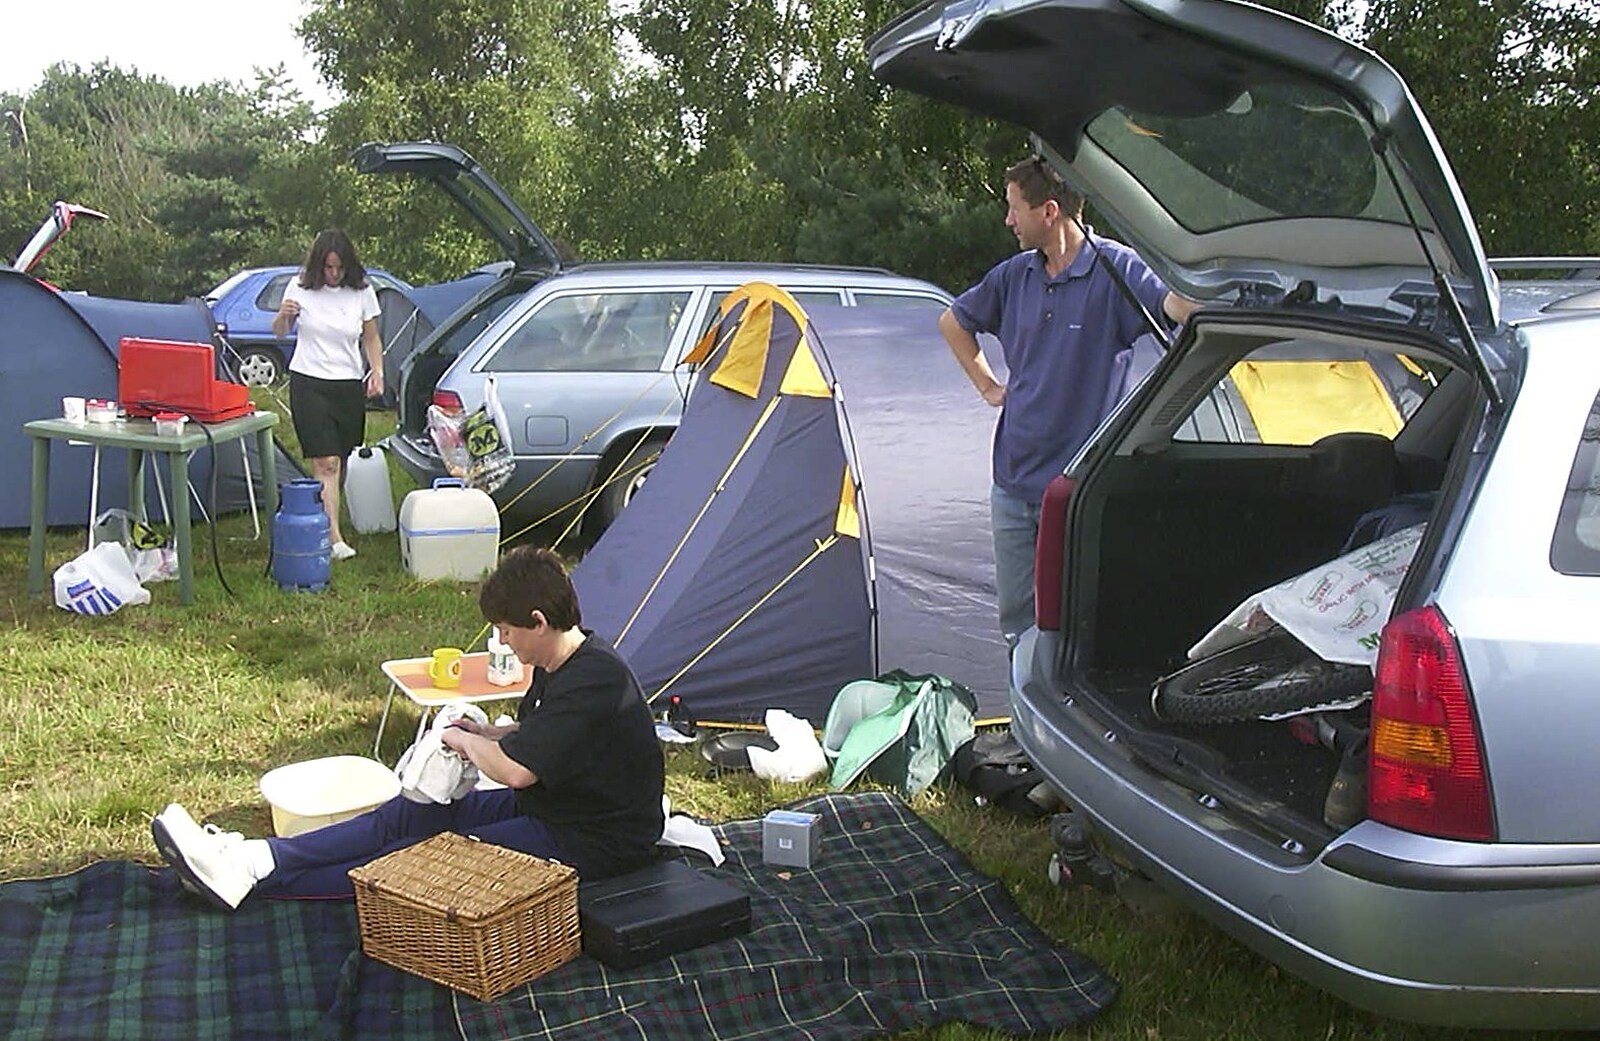 A BSCC Splinter Group Camping Trip, Shottisham, Suffolk - 13th August 2004: Another morning, another camp fry up